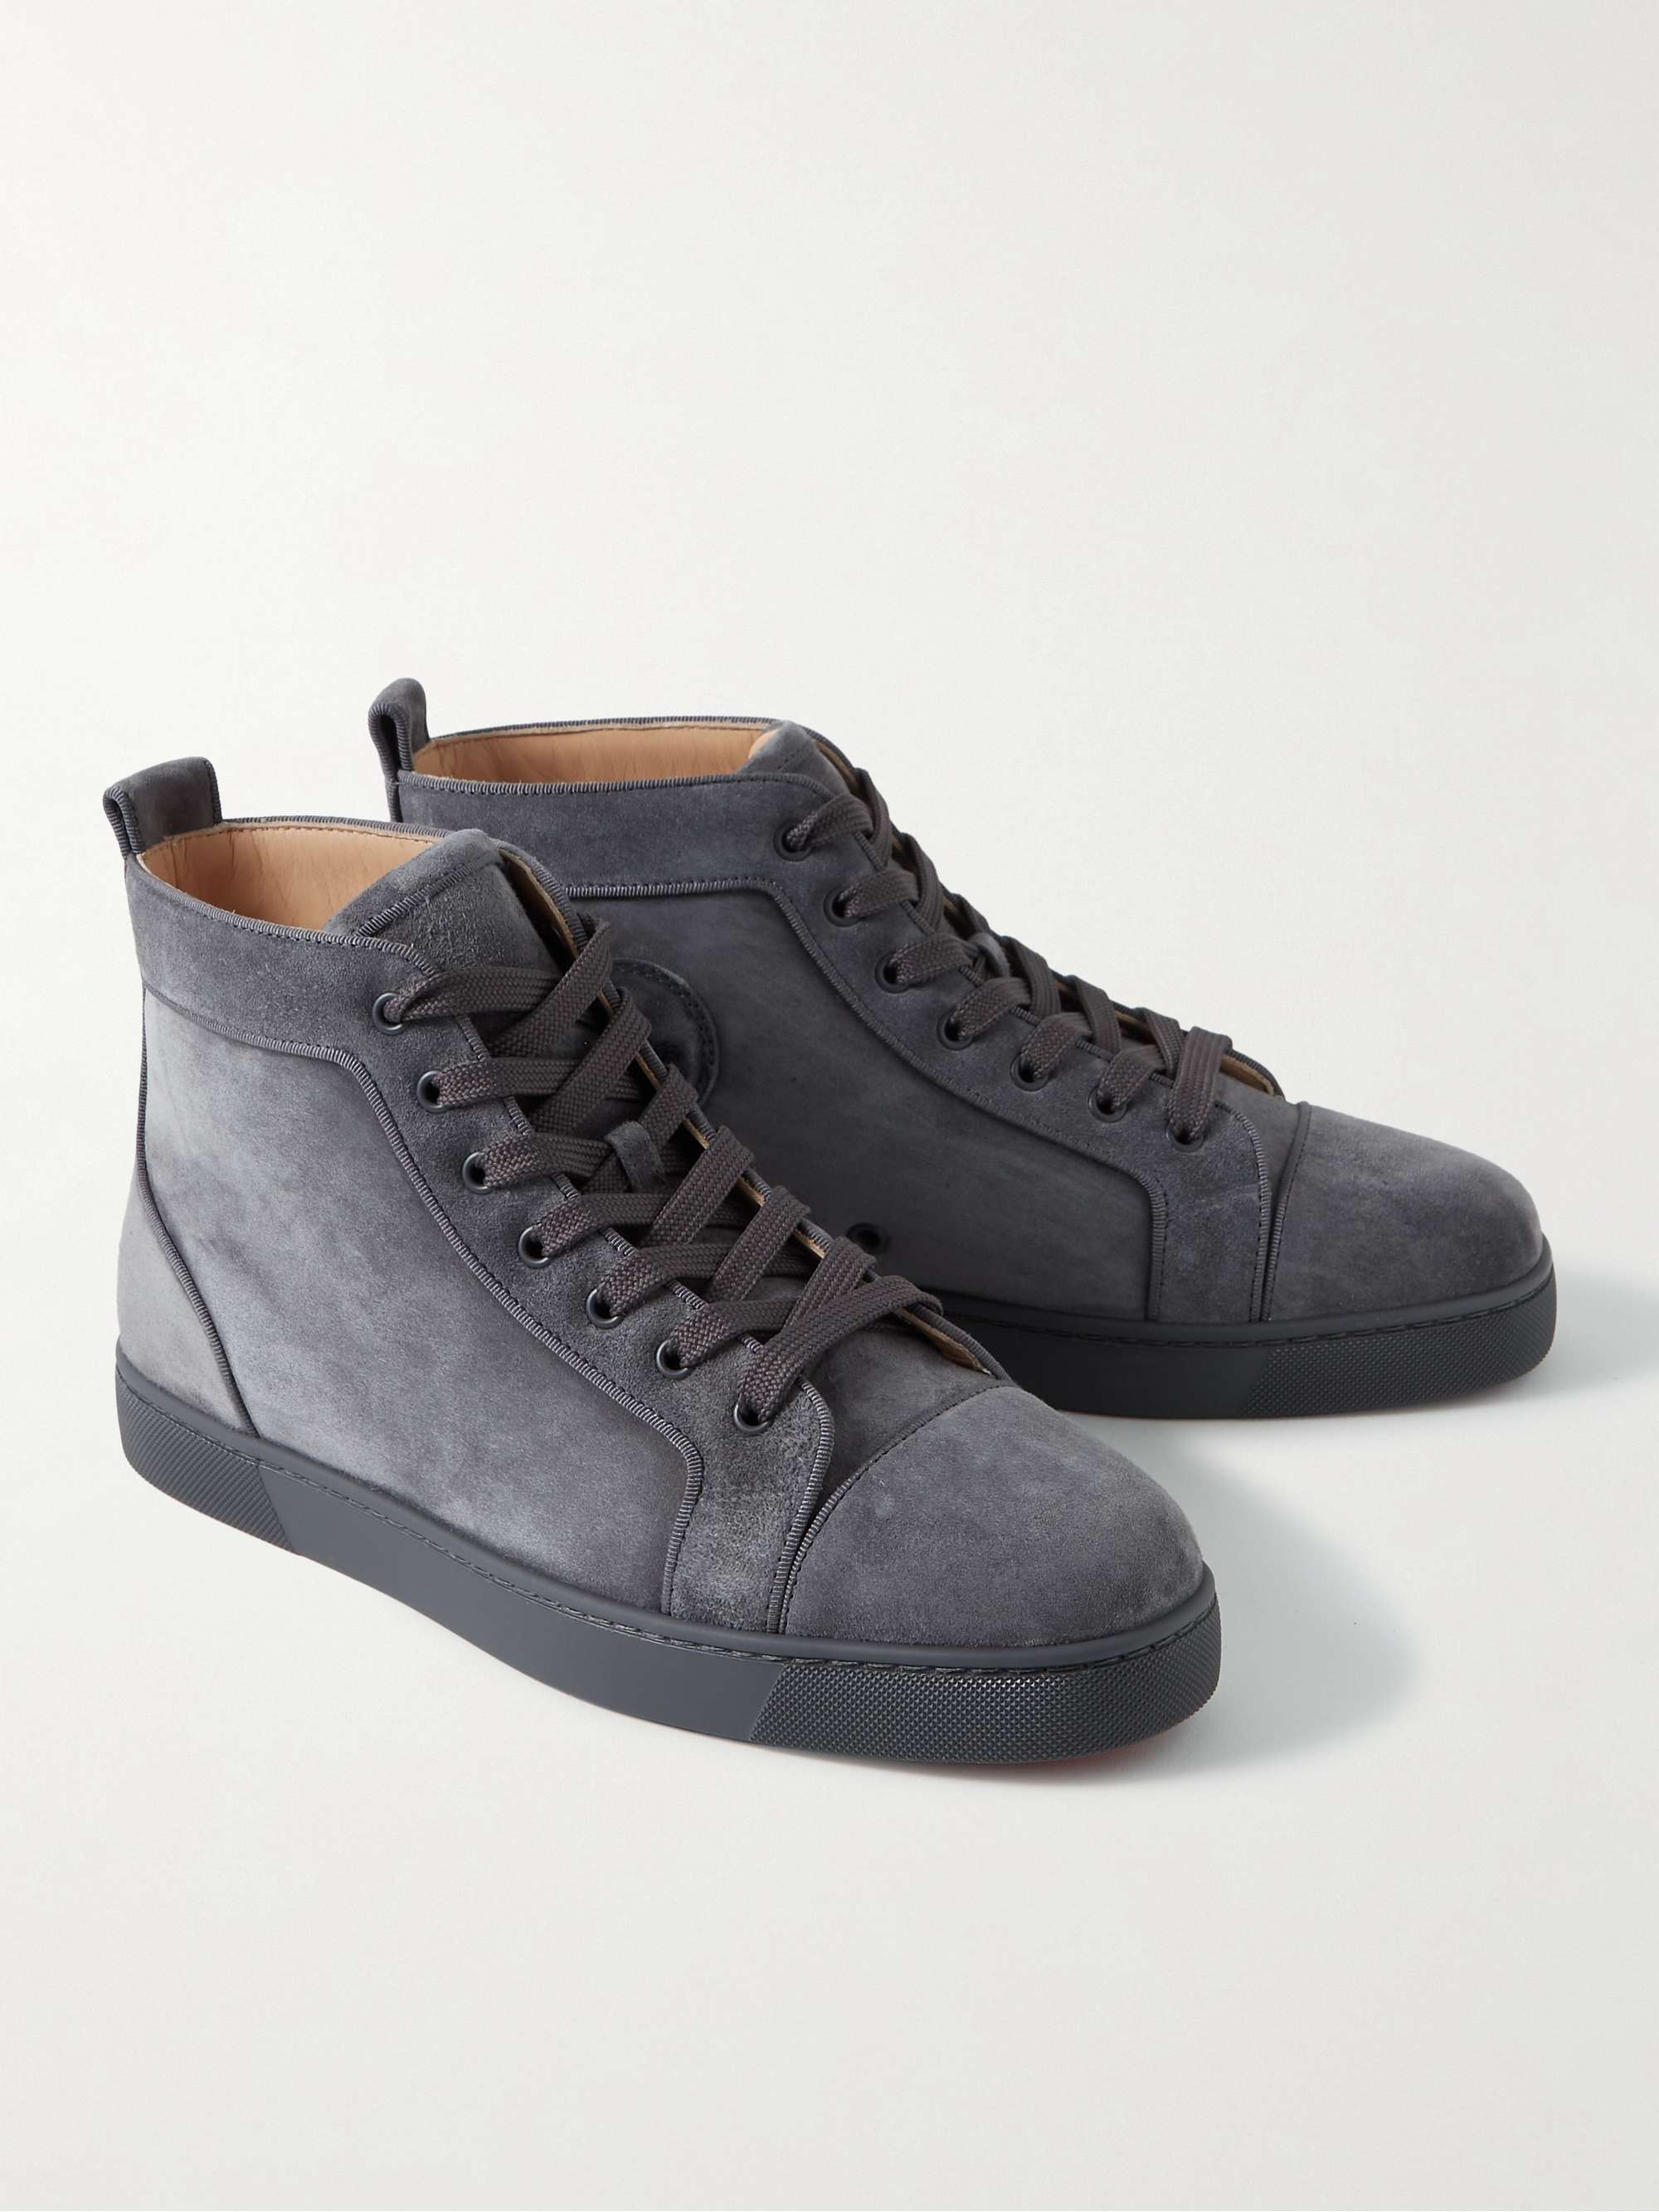 CHRISTIAN LOUBOUTIN Louis Orlato Grosgrain-Trimmed Suede High-Top Sneakers